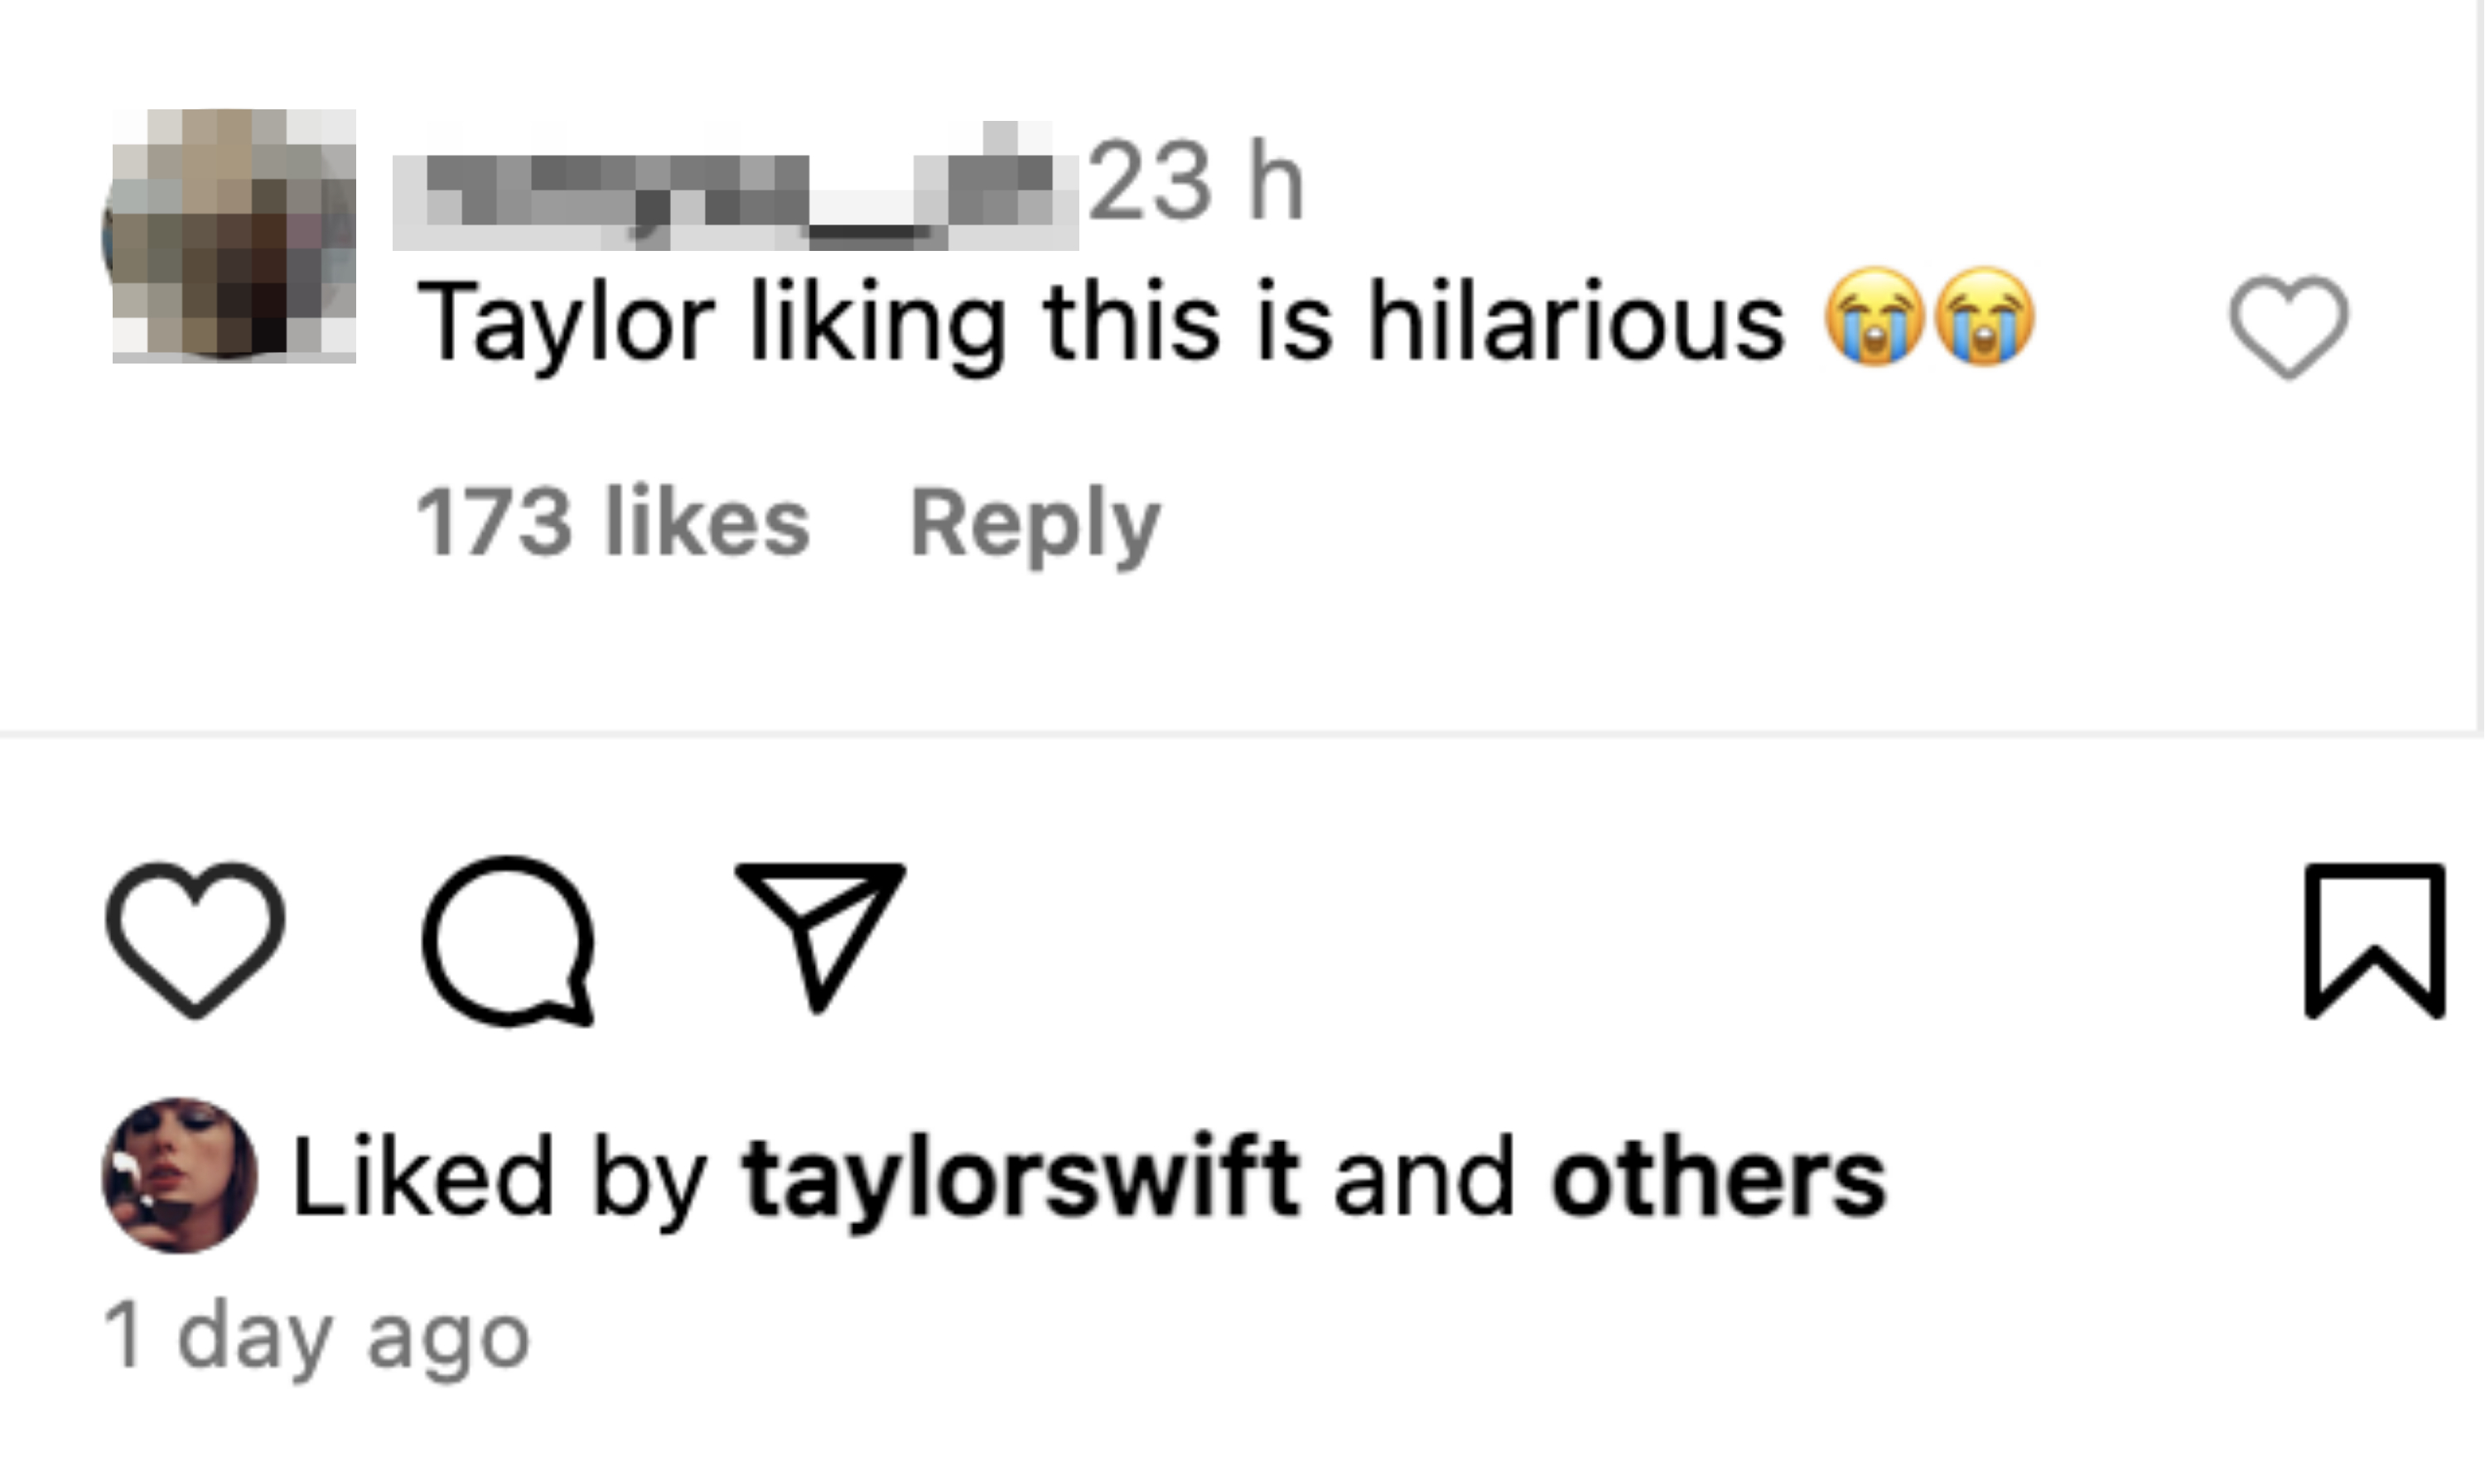 &quot;Taylor liking this is hilarious&quot; and a notification that Taylor liked the post